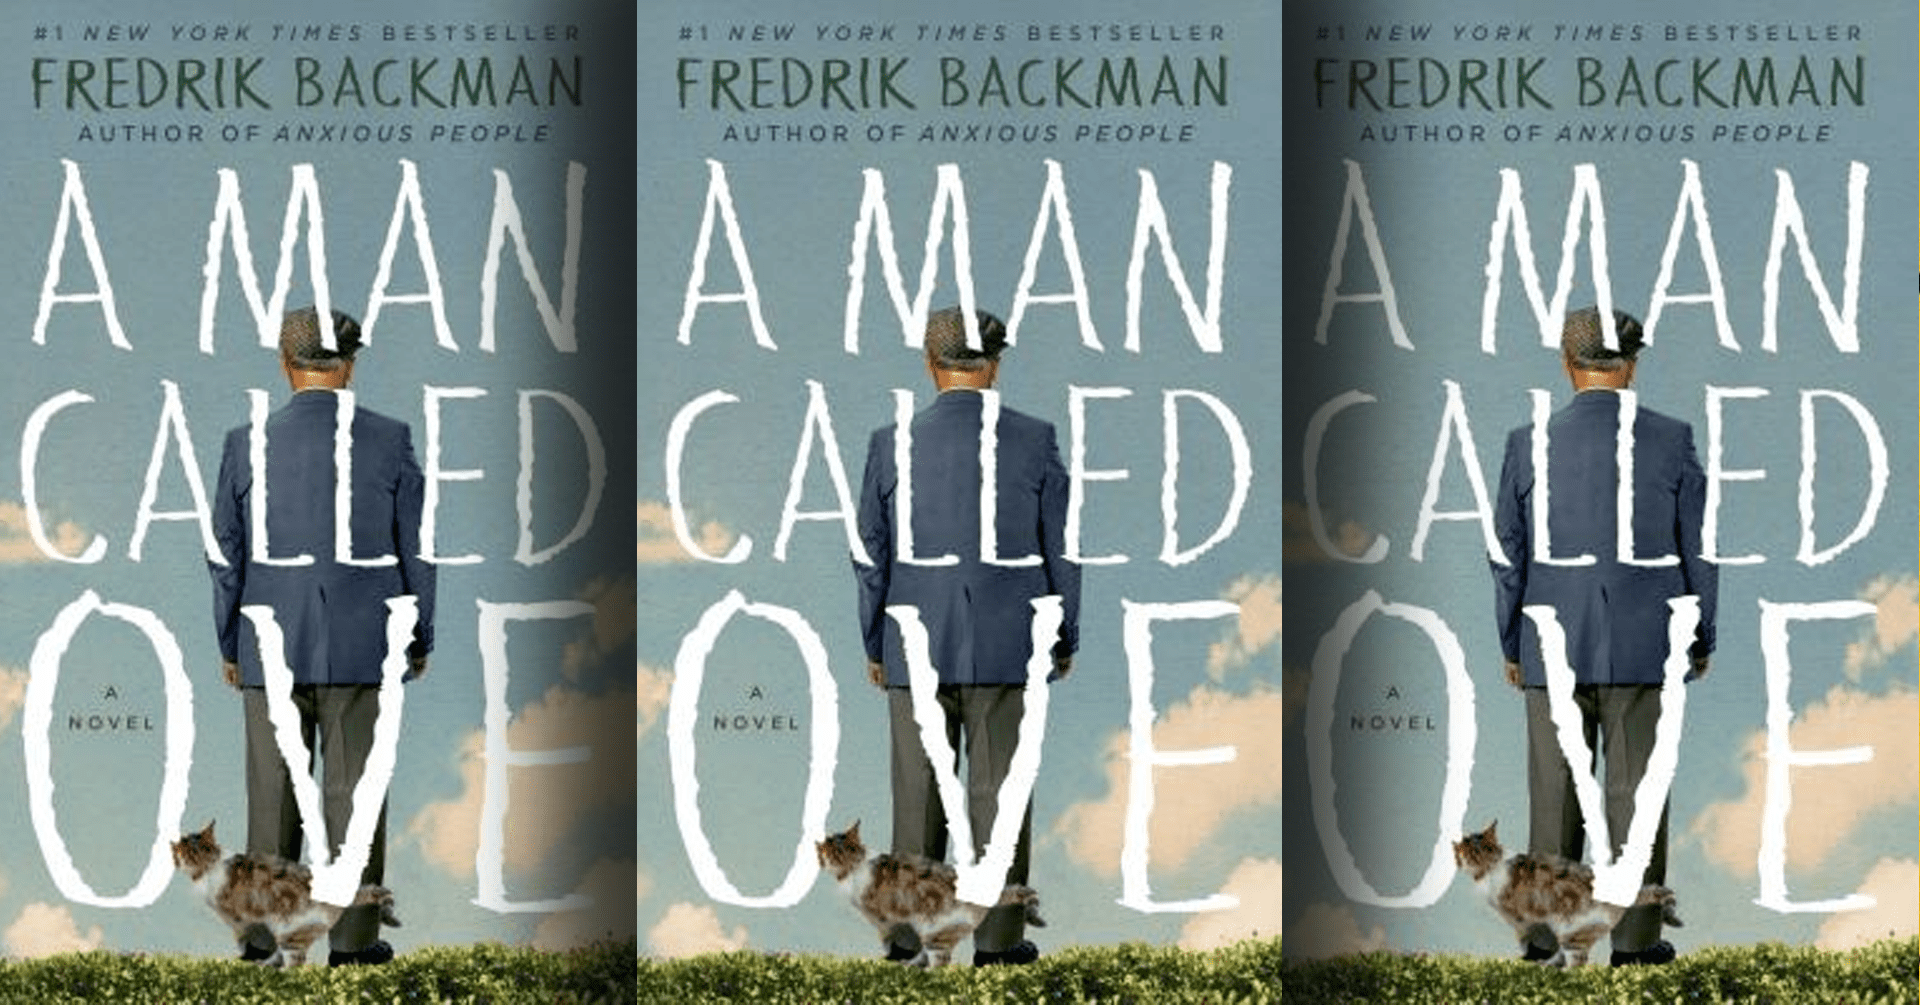 A Man Called Ove by Fredrik Backman (book cover)